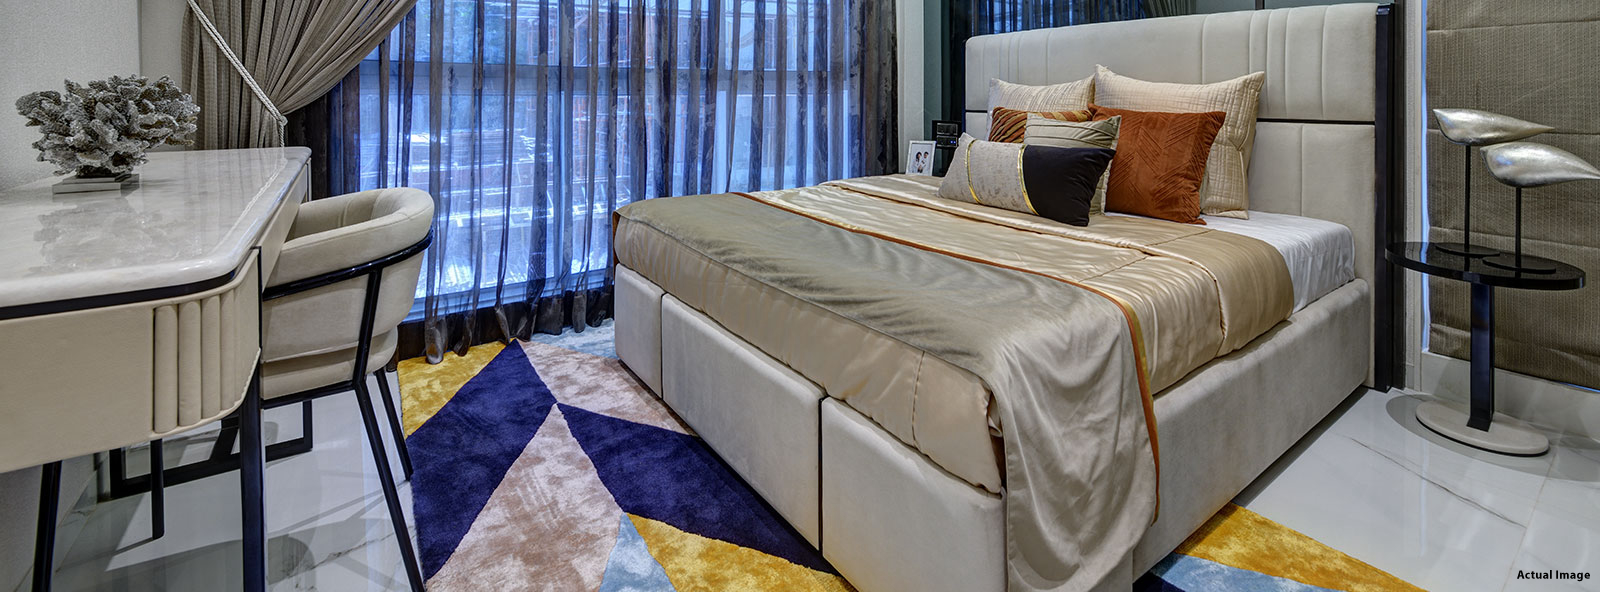 Bed Room 2 - Amaryllis Towers and Plaza - Nahar Group